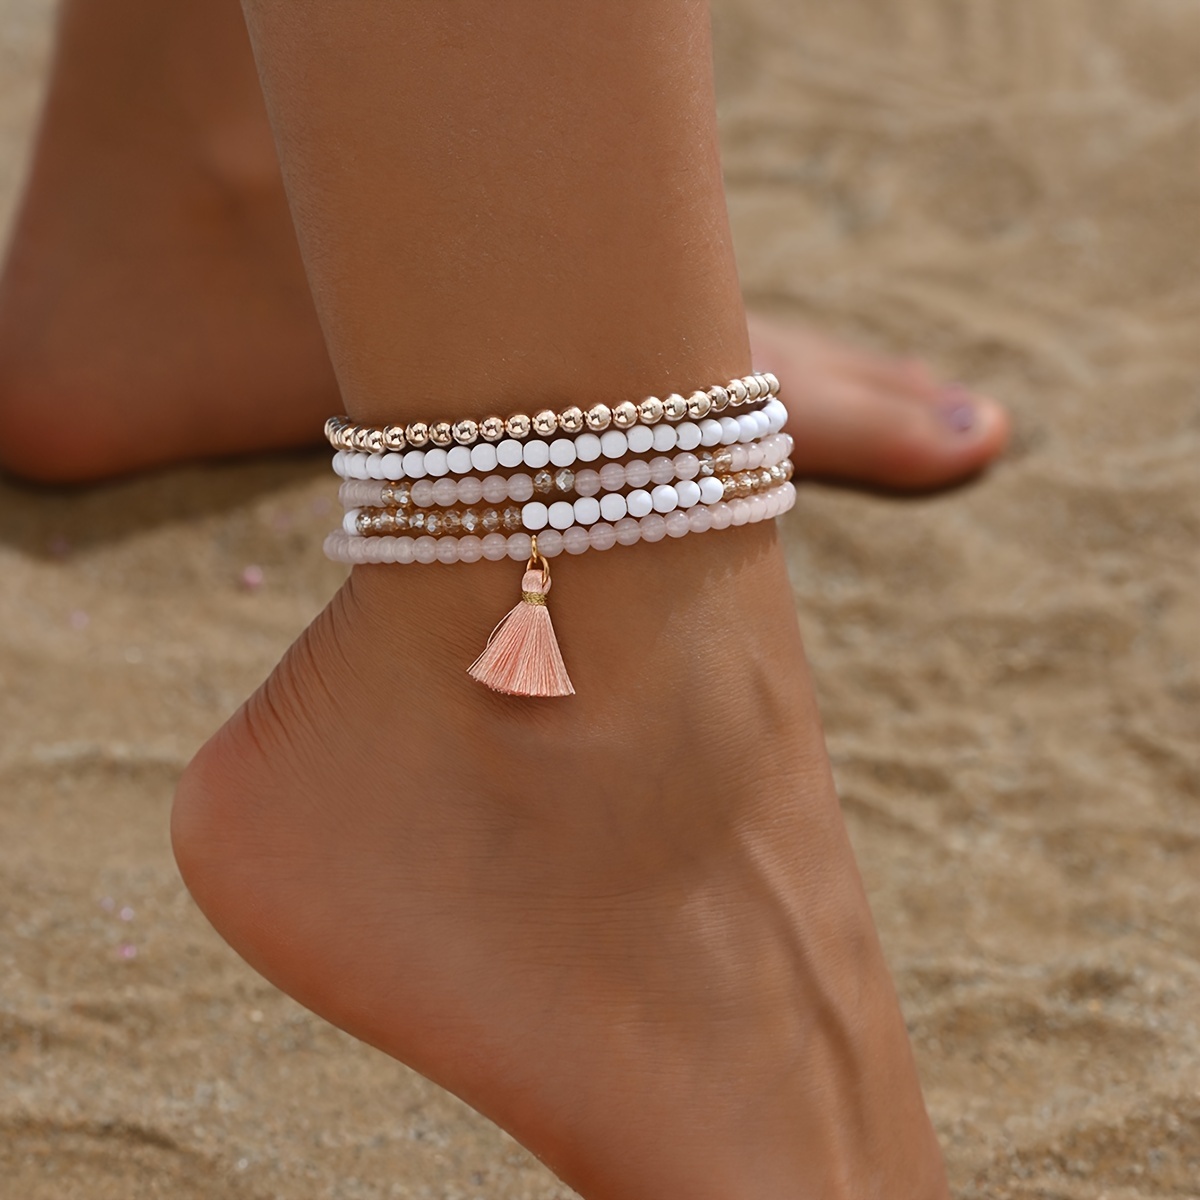 

5-piece Summer Beach Anklet Set - Pink Beaded & Faux Crystal Braided, Perfect For Women's Vacation & Everyday Wear